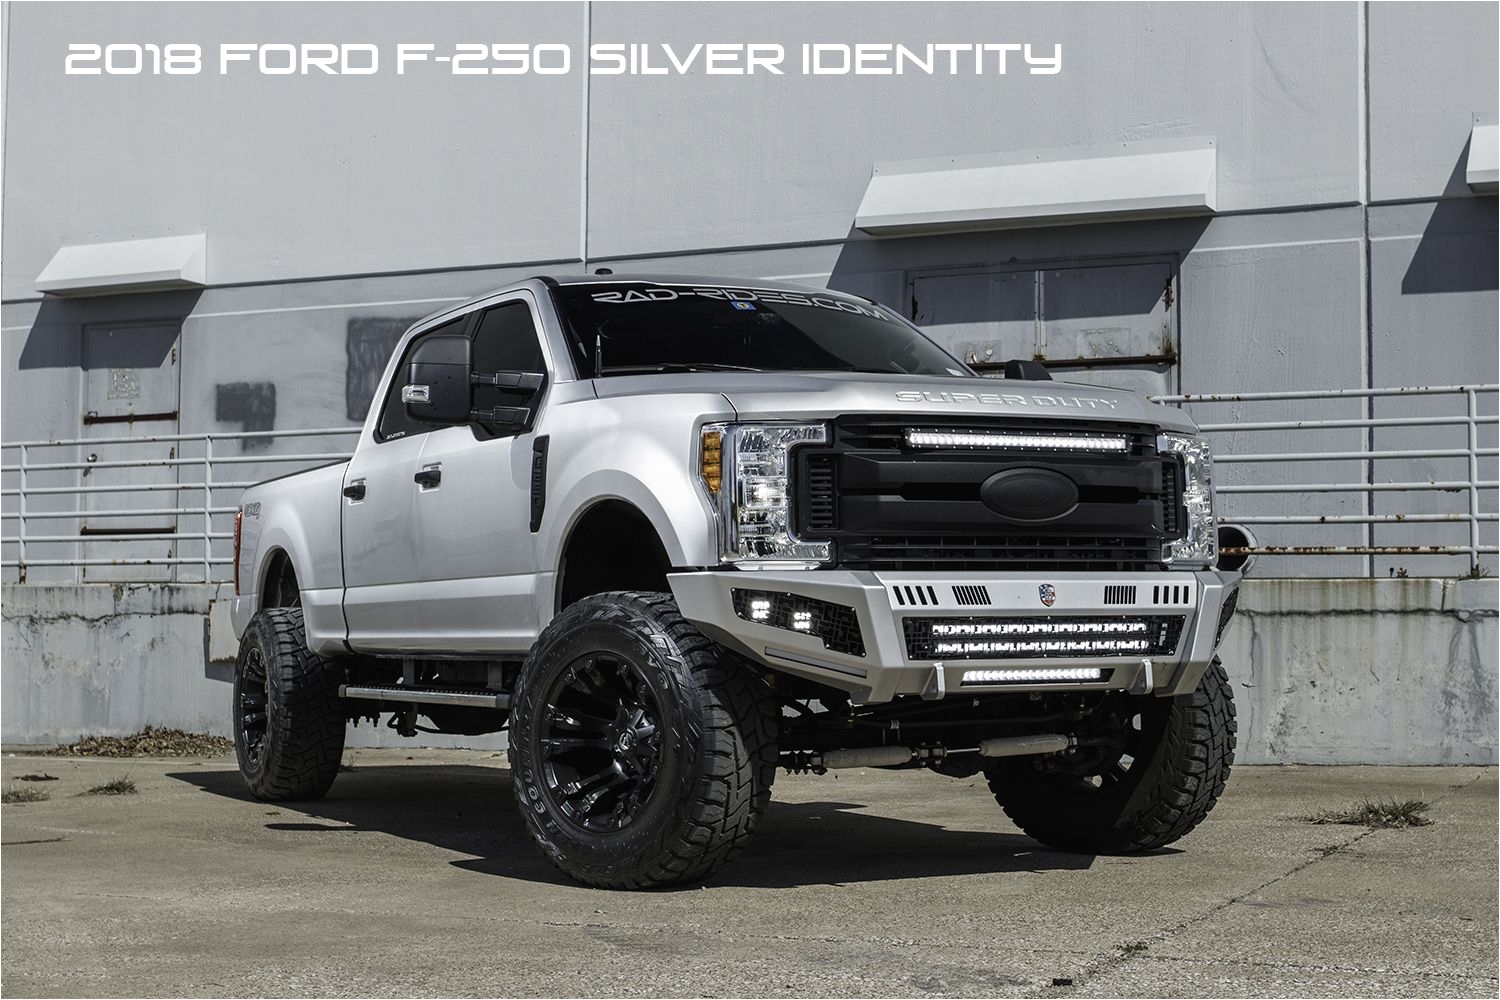 2018 ford f250 super duty lifted in silver with fuel vapor wheels and toyo mt tires with road armor identity bumpers with rigid lights in the bumper and